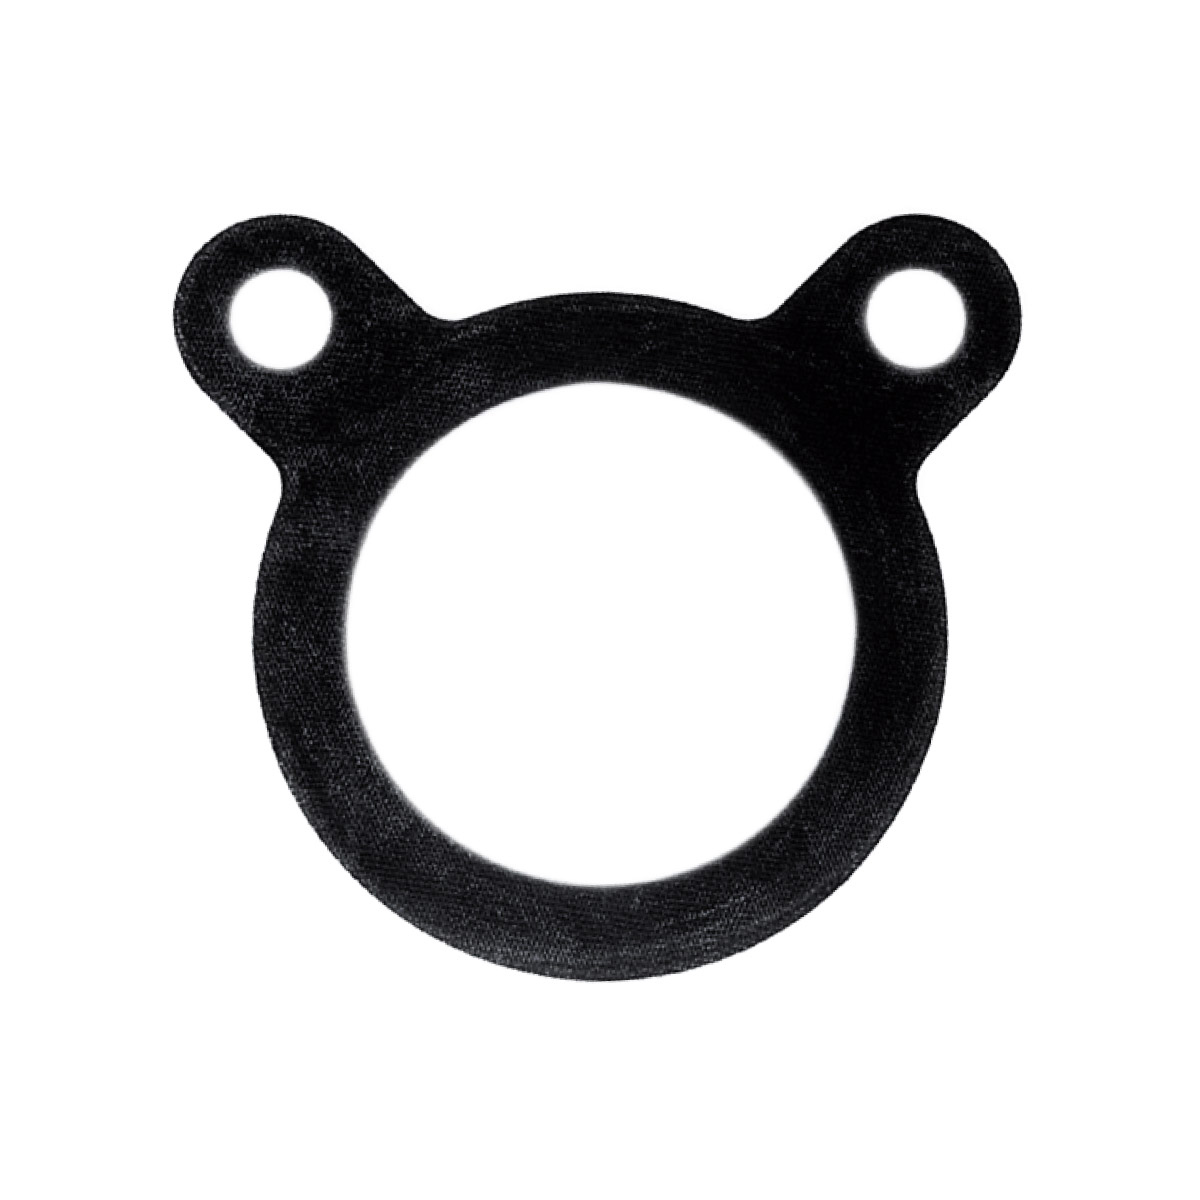 IBG® flat gasket for flange adapter, with 2 screw holes (EPDM) d63 IBG® flat gasket for flange adapter, with 2 screw holes (EPDM) d63